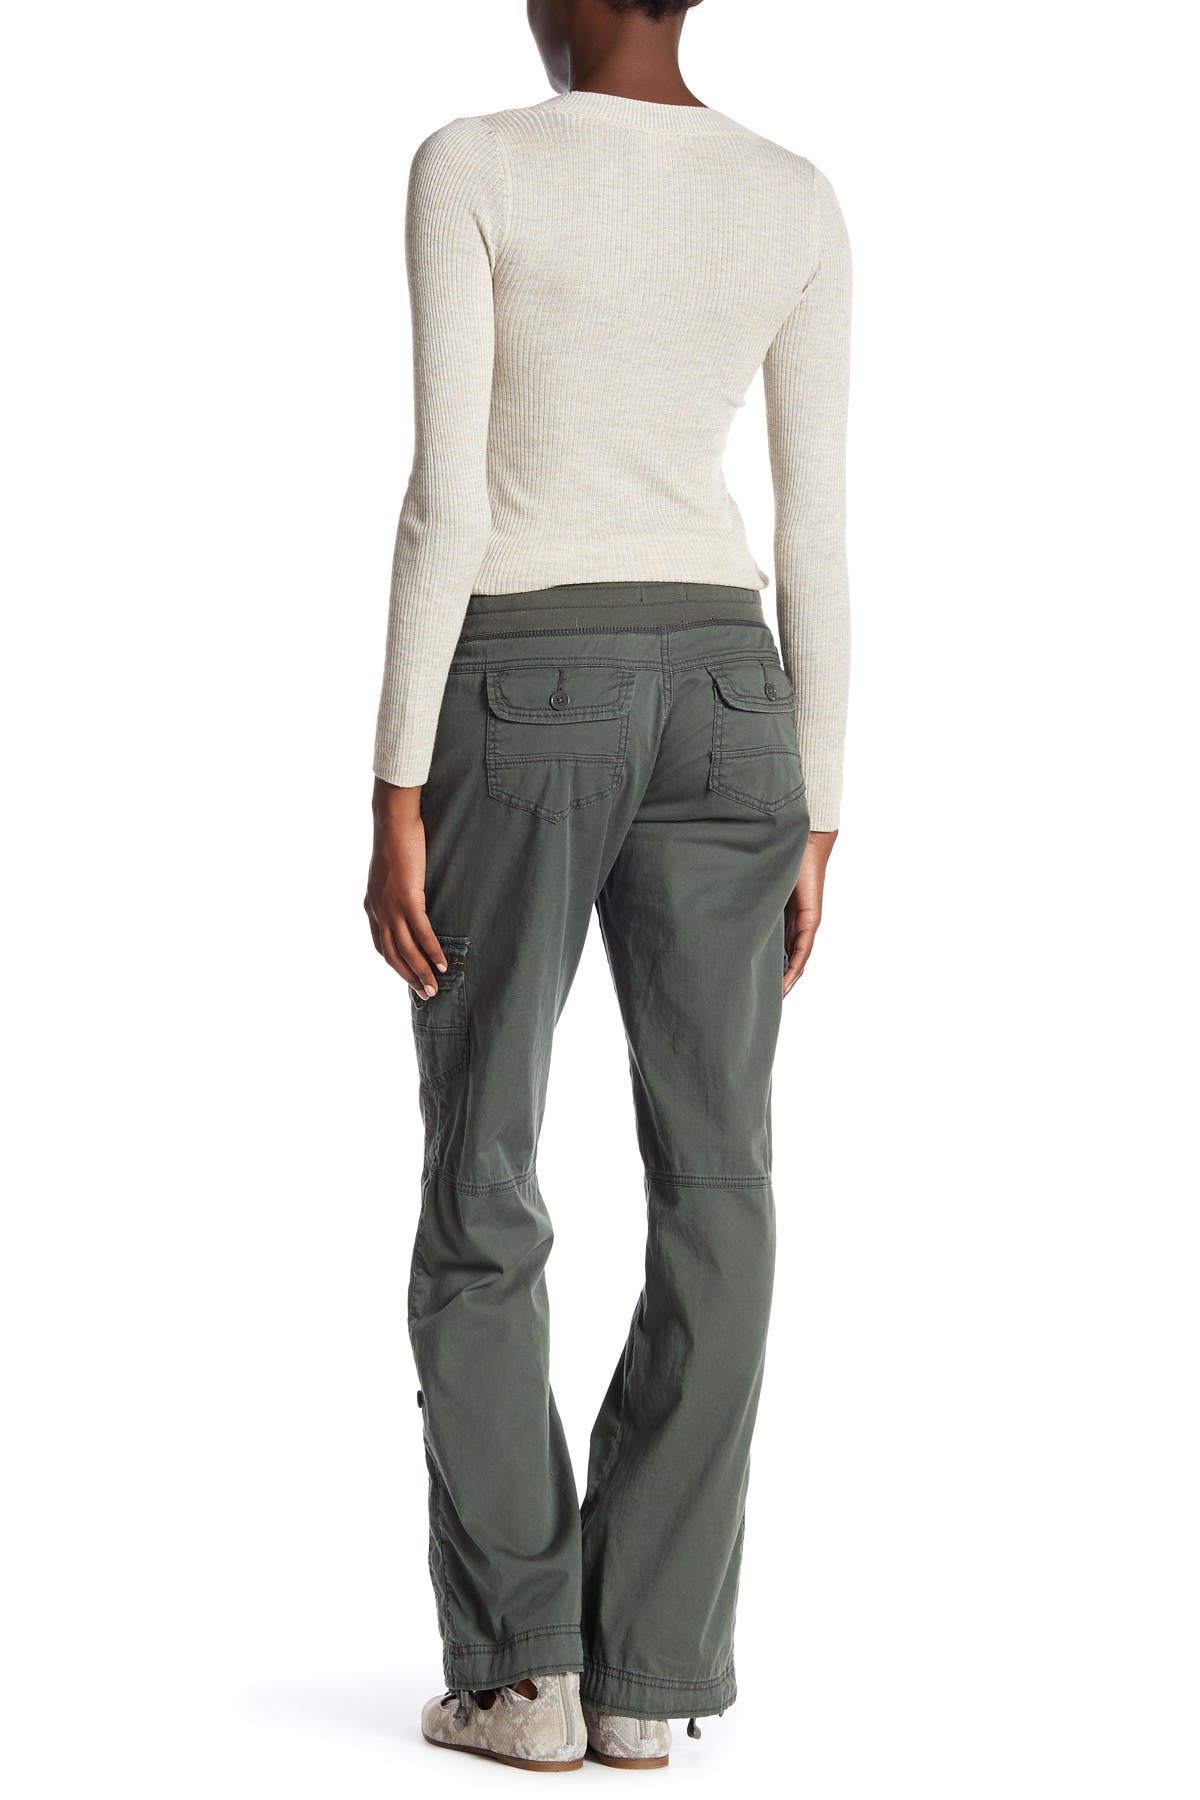 Supplies By Unionbay Lilah Rolled Cargo Pants In Light/pastel Green9